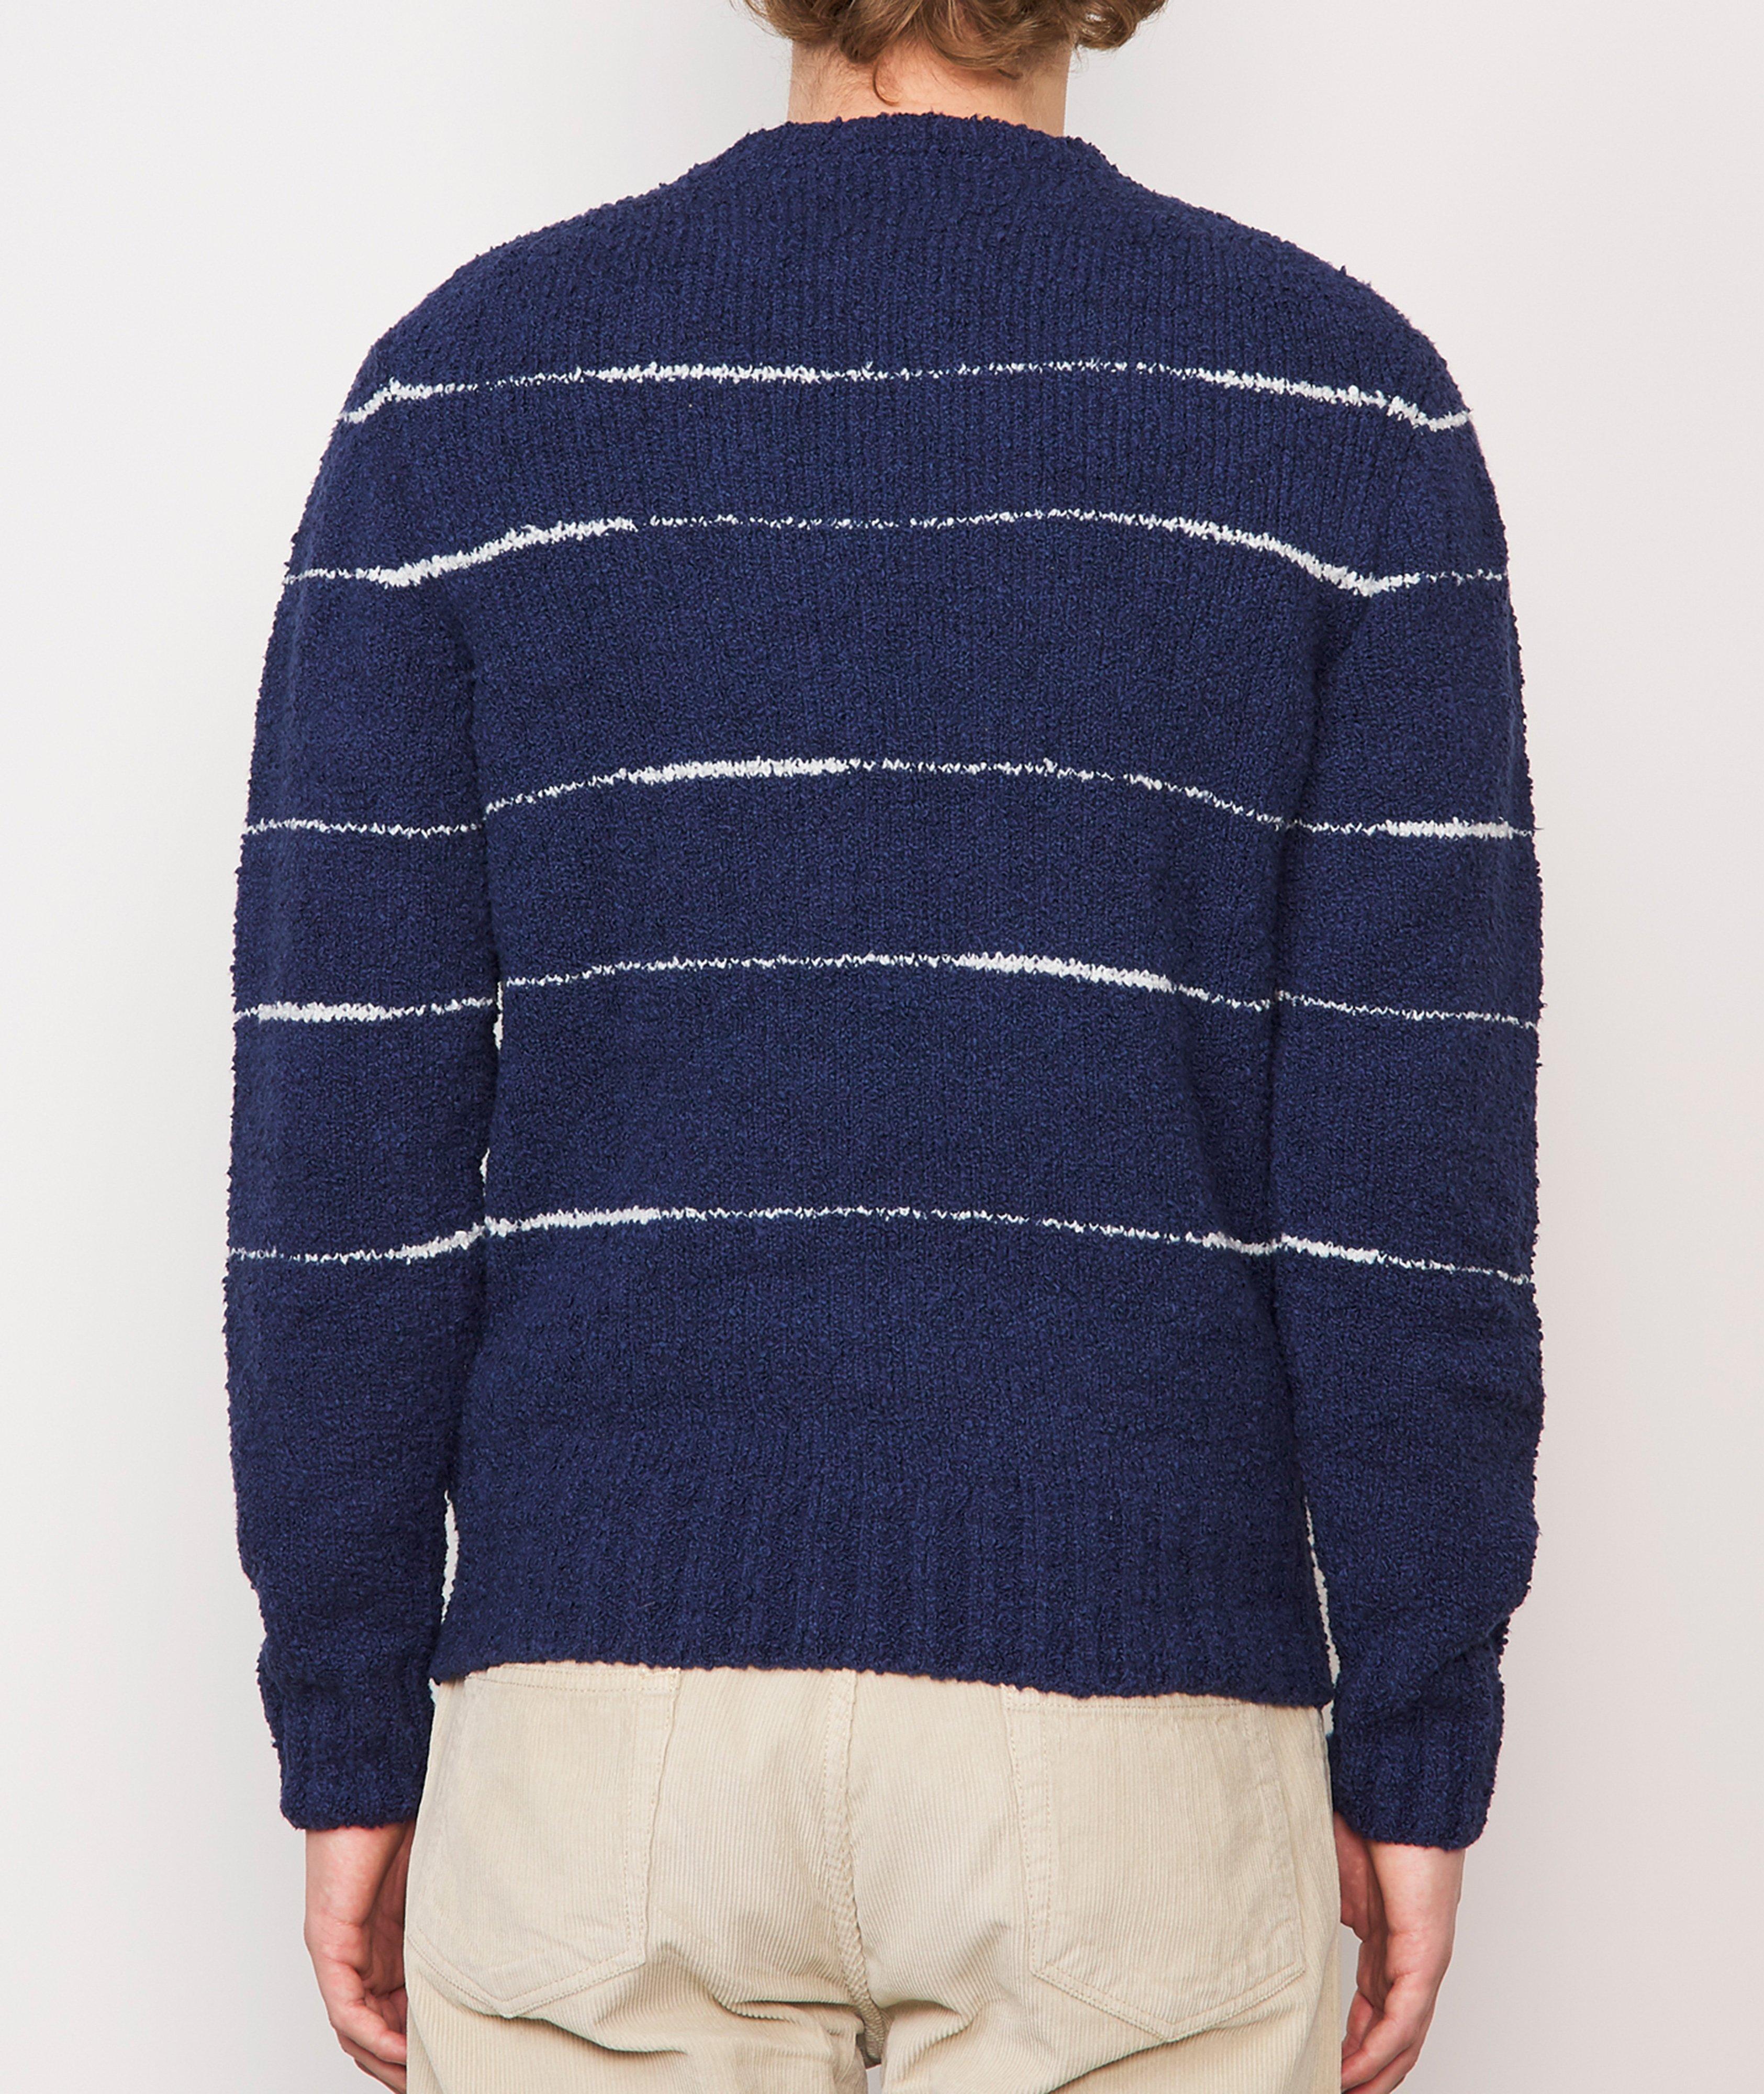 Officine Générale Marco Striped Cotton-Blend Sweater | Sweaters & Knits ...